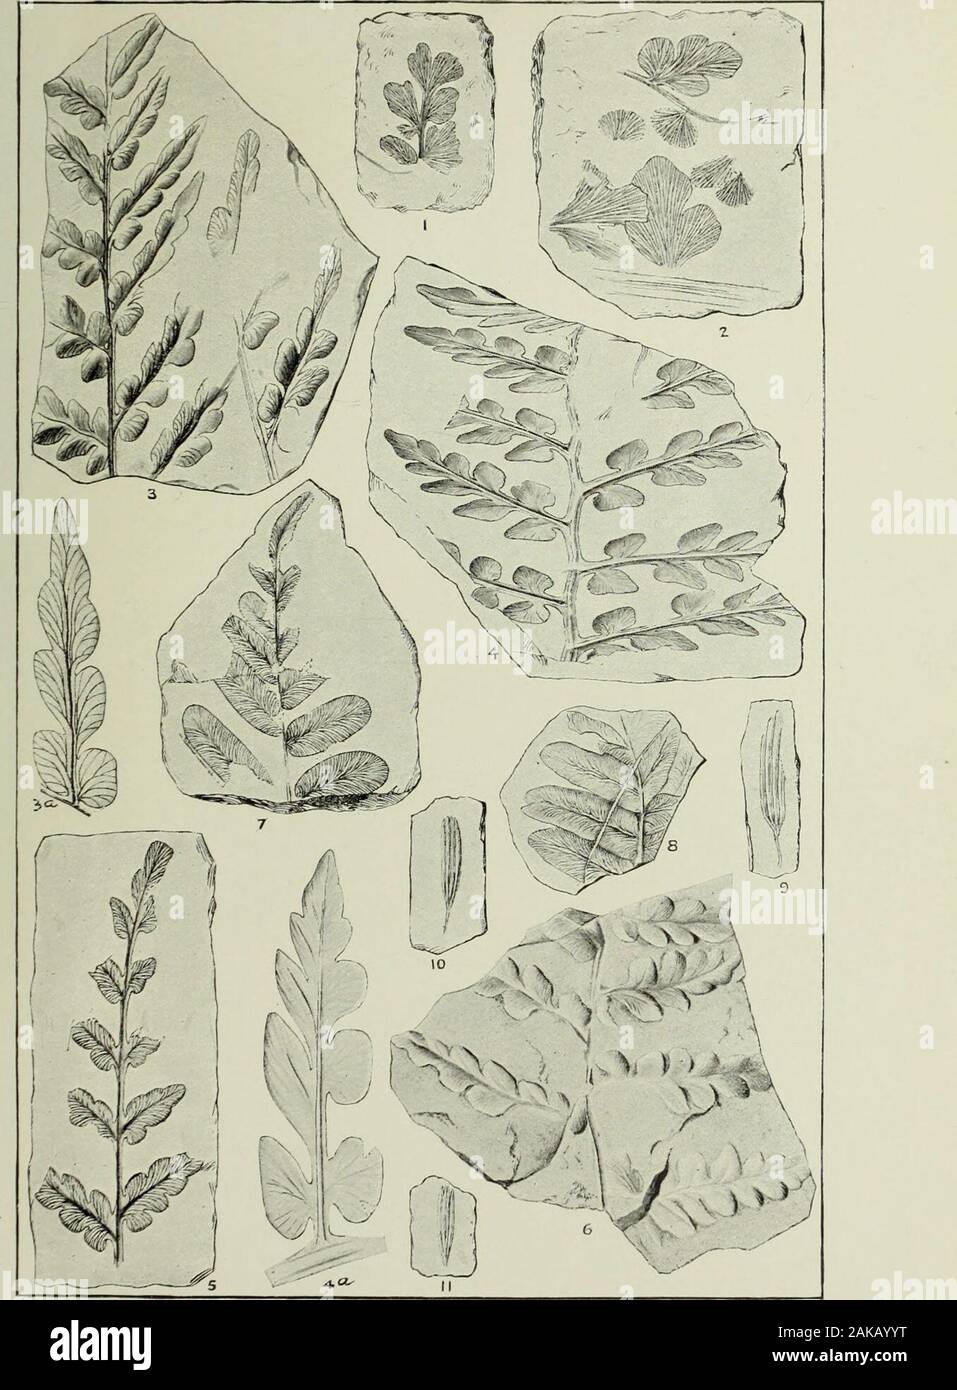 Annual report of the United States Geological Survey to the Secretary of the Interior . wice the natural size. Lower Lykens division—Mariopteris pottsvillea zone. Neuropteris Pocahontas var. in^equalis D. W. (Page 890.) Figs. 7 and 8. These specimens show the elongated pinnules with Callipteridioidbases, such as occur in the middle and upper portions of the pinna?.The specimen shown in fig. 7 is from bed D, 710 feet below the Twin coalin the gap at Pottsville; the original of fig. 8 is from the Kalmia colliery. Lower Lykens division. Whittleseya Campbelli D. W. (Page 905.) Figs. 9, 10, and 11. Stock Photo